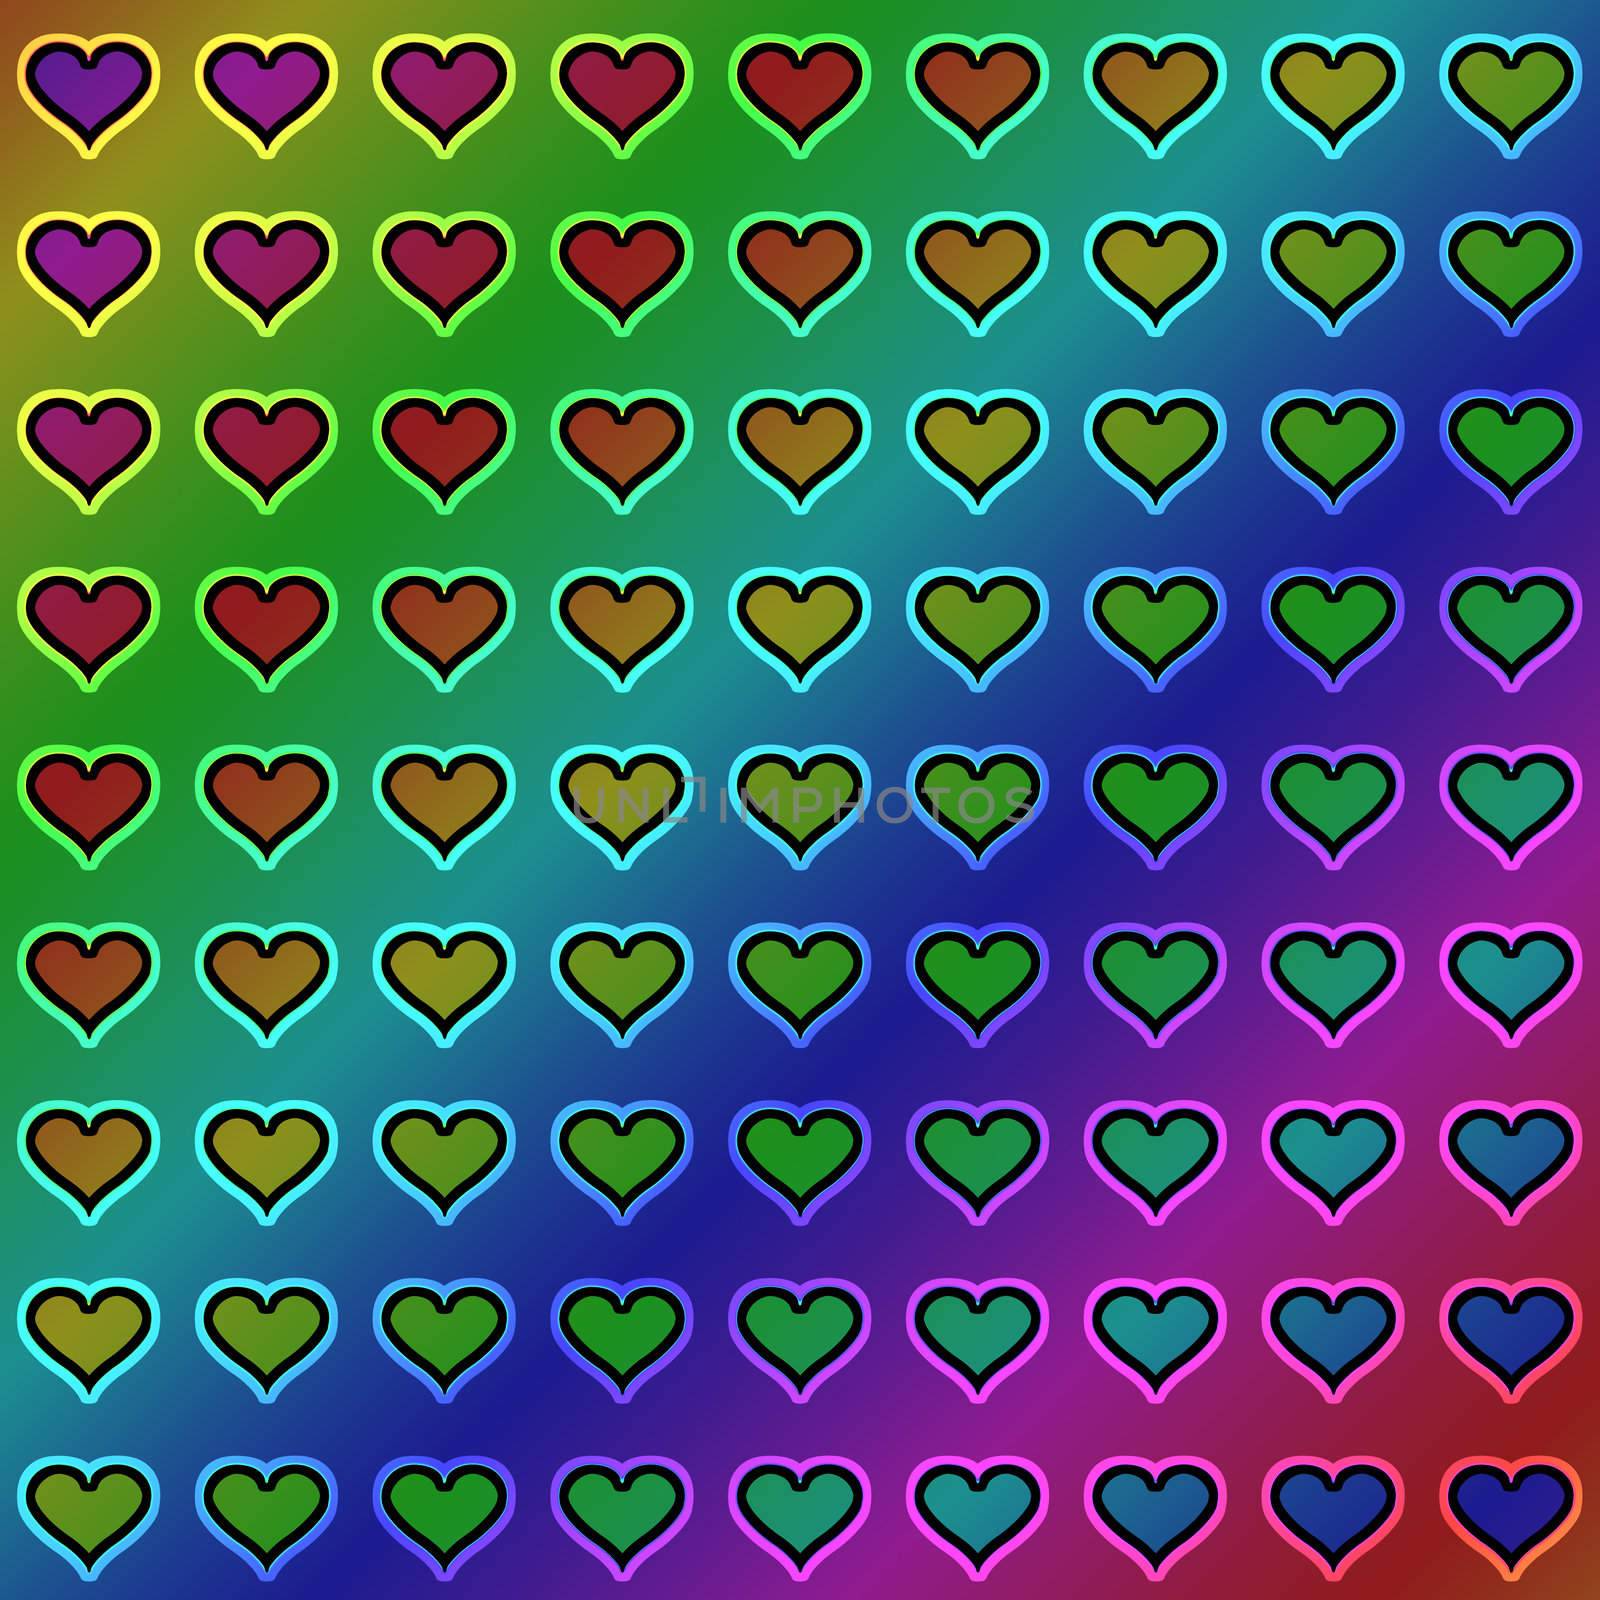 texture of many hearts on a gradient background